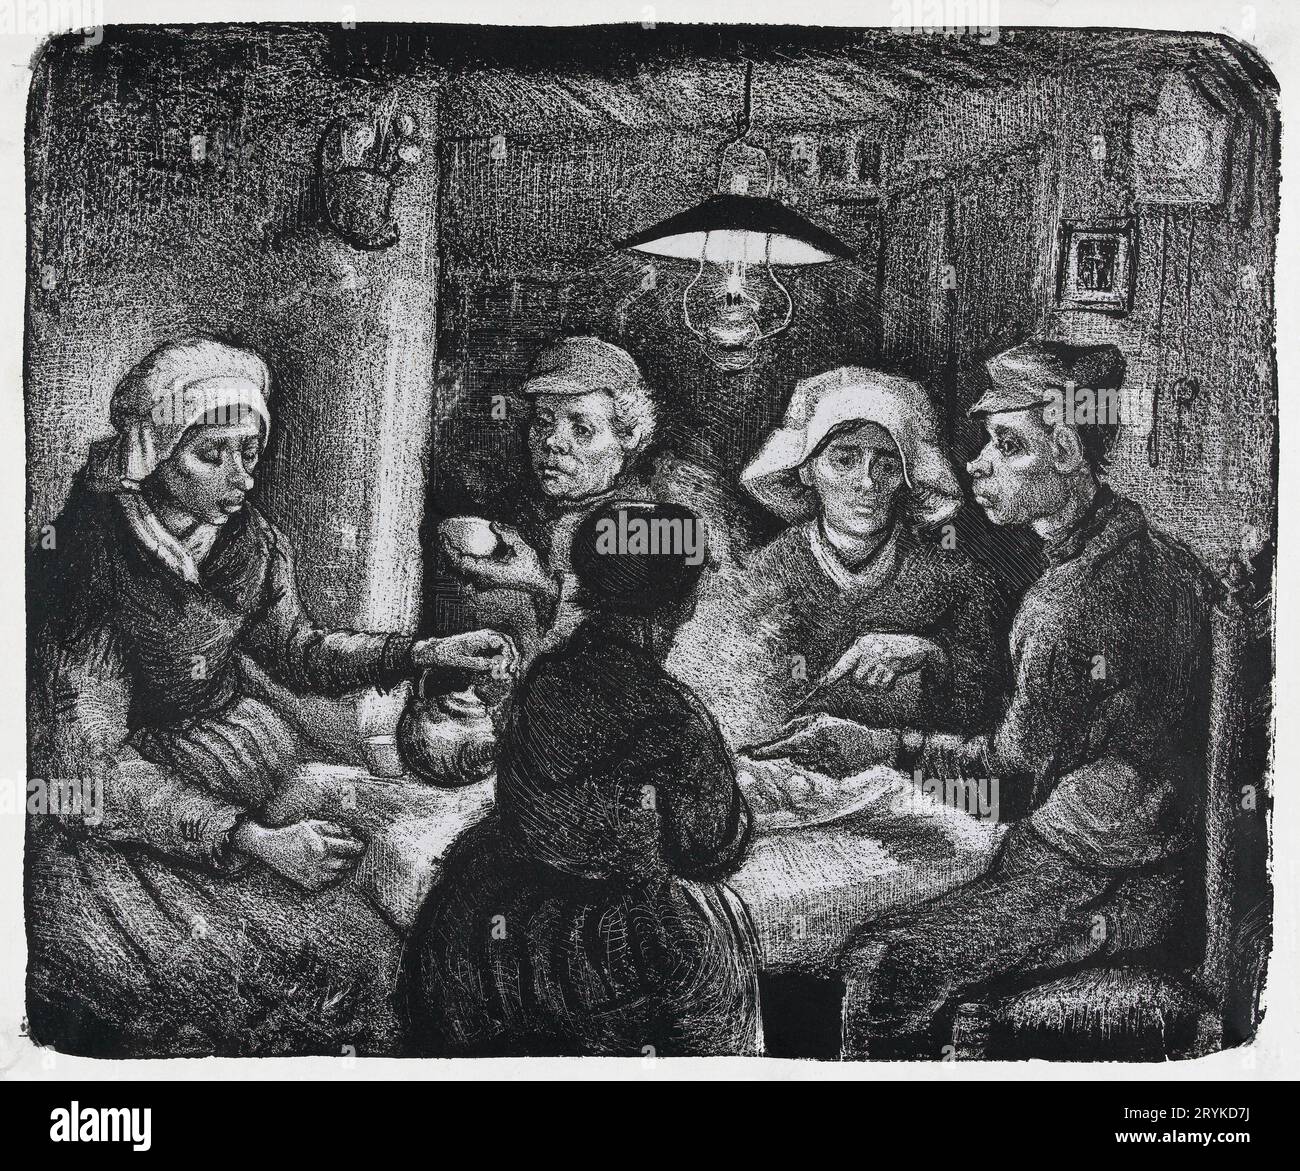 Composition lithograph of The Potato Eaters by Vincent Van Gogh. Original from The Rijksmuseum. Stock Photo